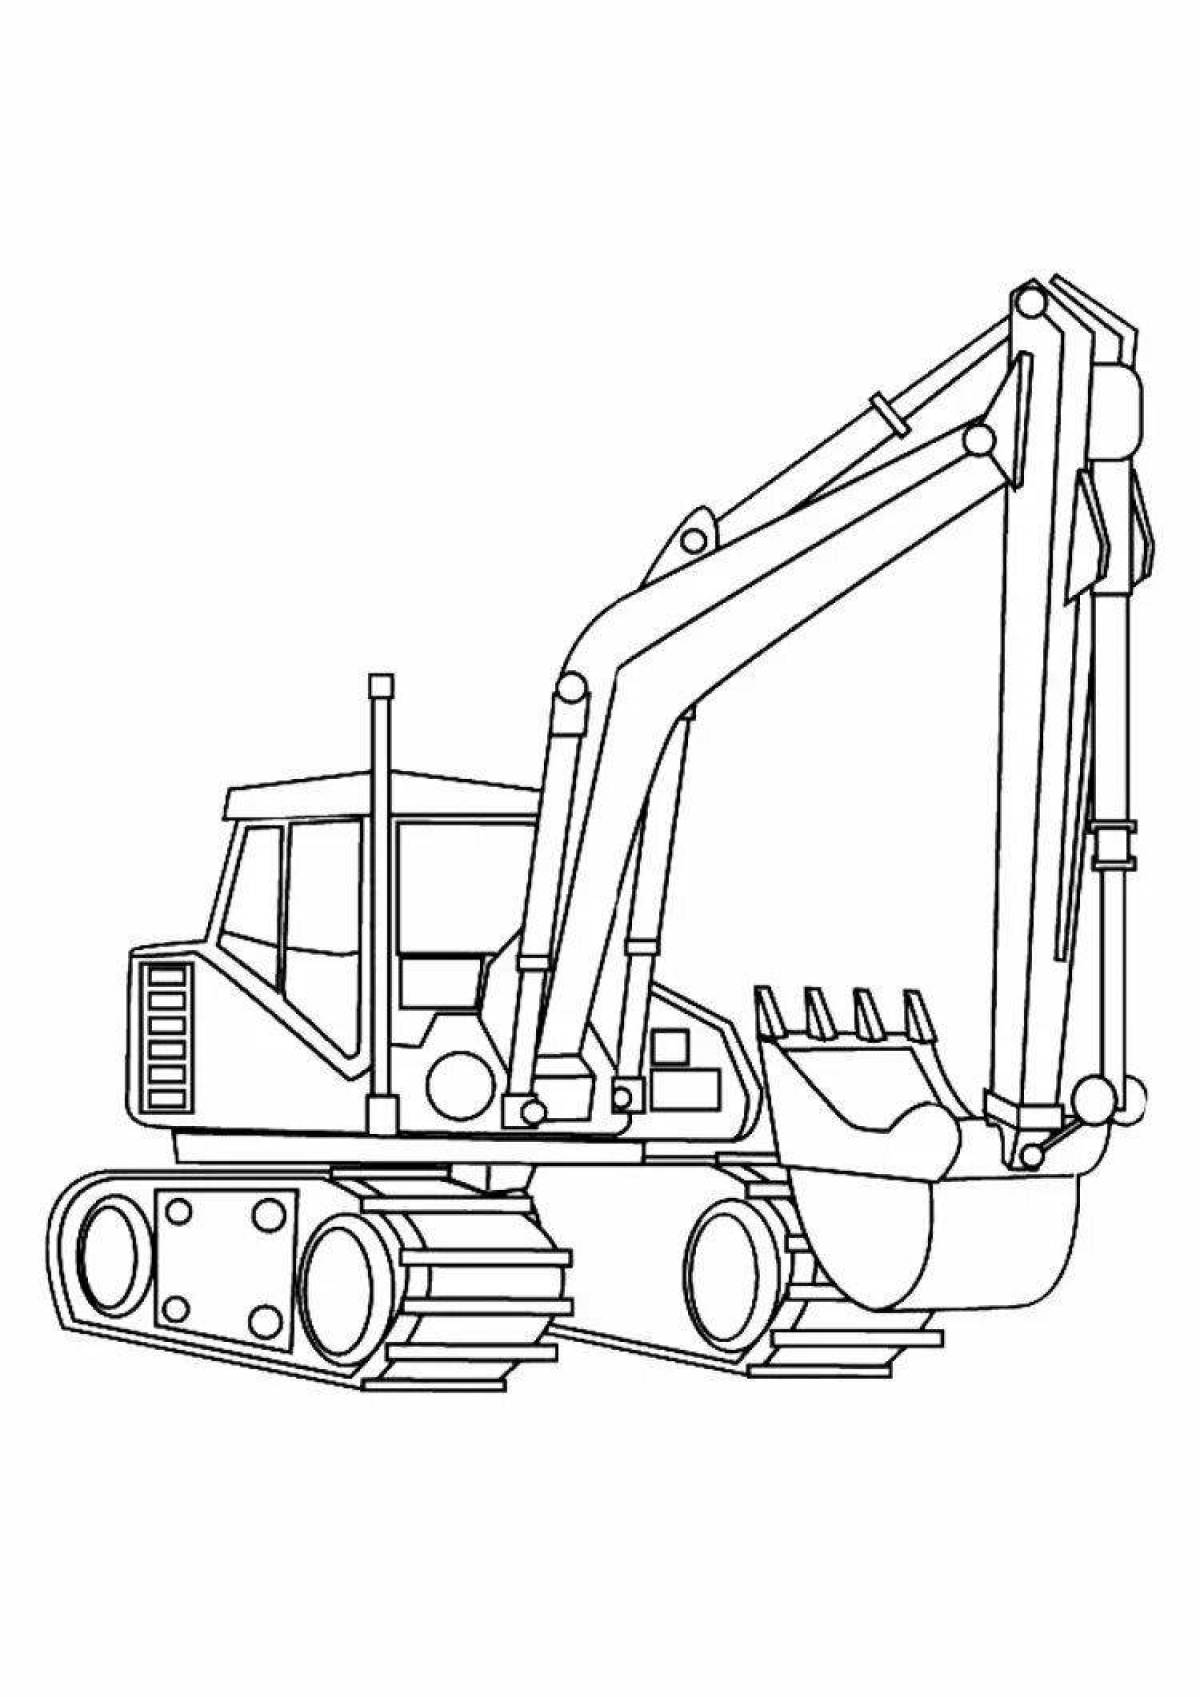 Fabulous excavator coloring book for kids